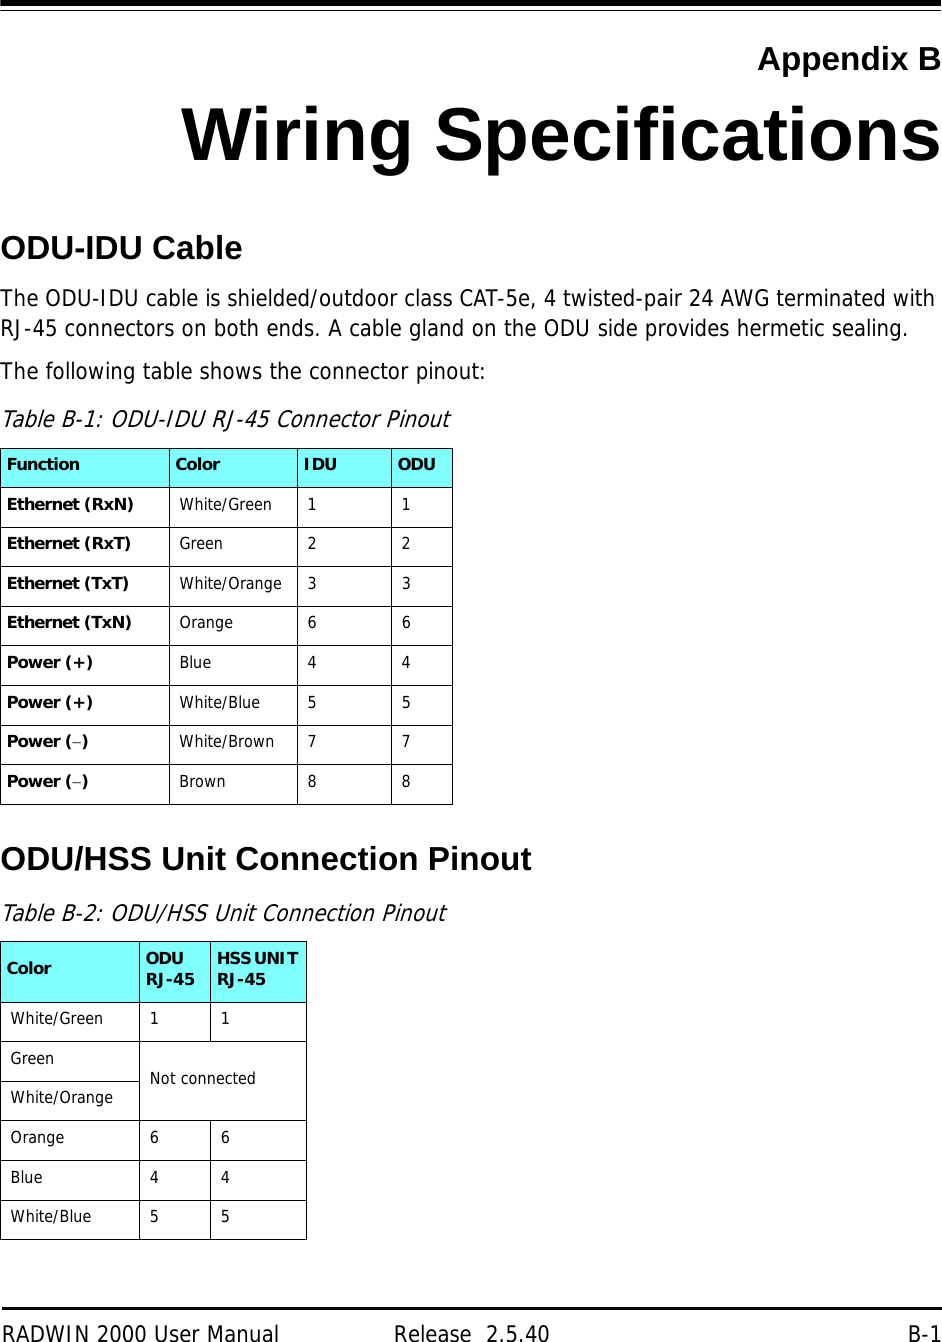 RADWIN 2000 User Manual Release  2.5.40 B-1Appendix BWiring SpecificationsODU-IDU CableThe ODU-IDU cable is shielded/outdoor class CAT-5e, 4 twisted-pair 24 AWG terminated with RJ-45 connectors on both ends. A cable gland on the ODU side provides hermetic sealing.The following table shows the connector pinout:ODU/HSS Unit Connection PinoutTable B-1: ODU-IDU RJ-45 Connector PinoutFunction Color IDU ODUEthernet (RxN) White/Green 1 1Ethernet (RxT) Green 2 2Ethernet (TxT) White/Orange 3 3Ethernet (TxN) Orange 6 6Power (+) Blue 4 4 Power (+) White/Blue 5 5Power ()White/Brown 7 7Power ()Brown 8 8Table B-2: ODU/HSS Unit Connection PinoutColor ODU RJ-45 HSS UNIT RJ-45White/Green 1 1 Green Not connectedWhite/OrangeOrange 6 6 Blue 4 4 White/Blue 5 5 